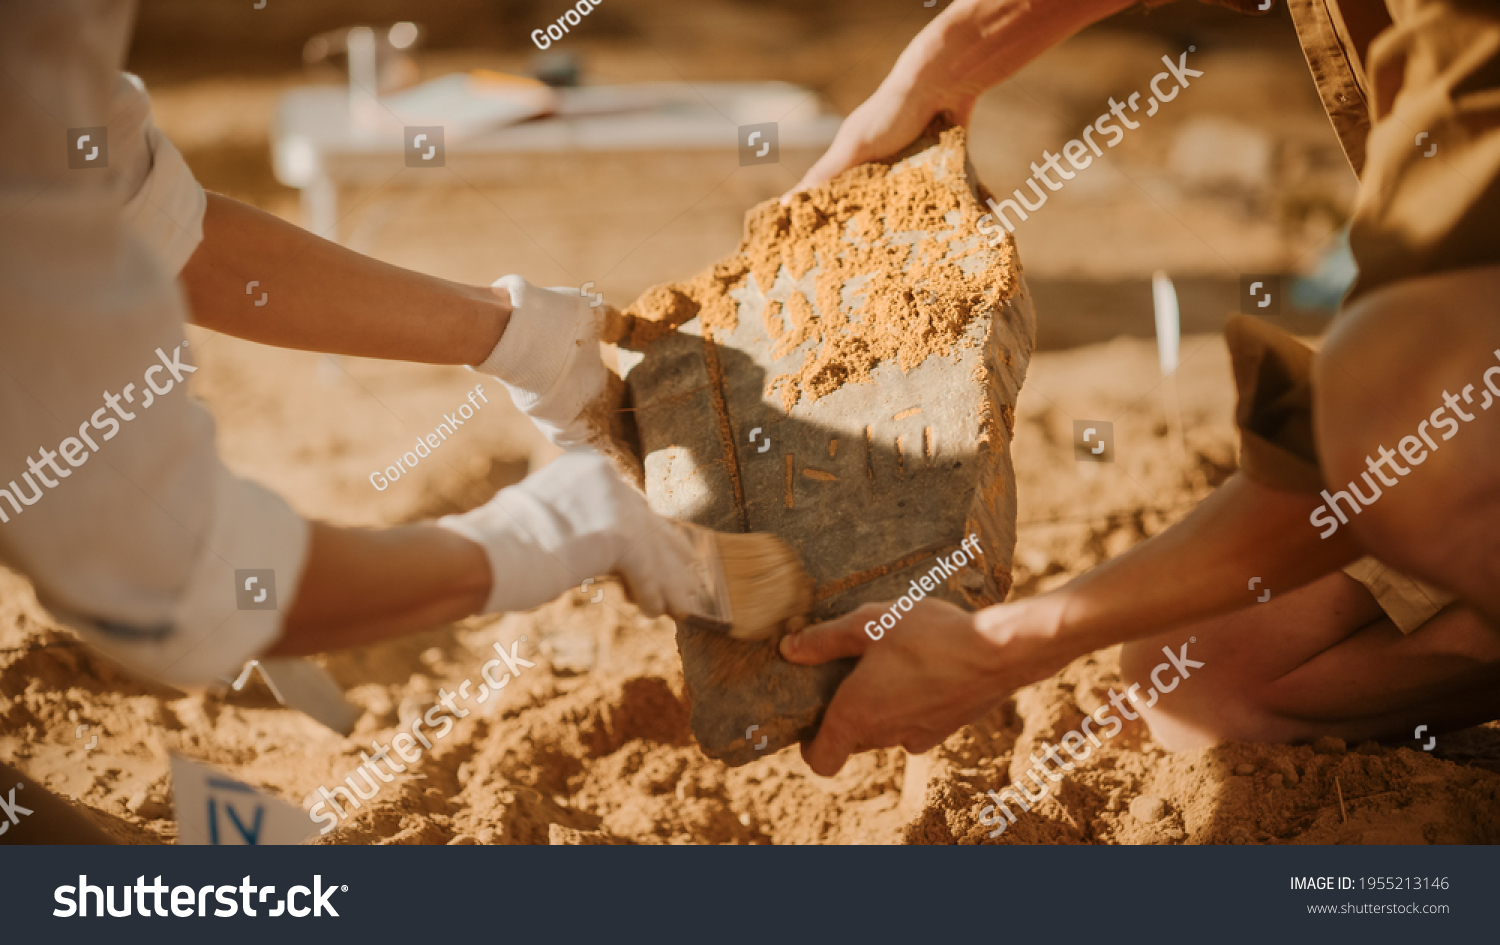 Archeological Digging Site: Two Great Archeologists Work on Excavation Site, Carefully Cleaning, Holding Newly Discovered Ancient Civilization Cultural Artifact, Historic Clay Tablet, Fossil Remains #1955213146